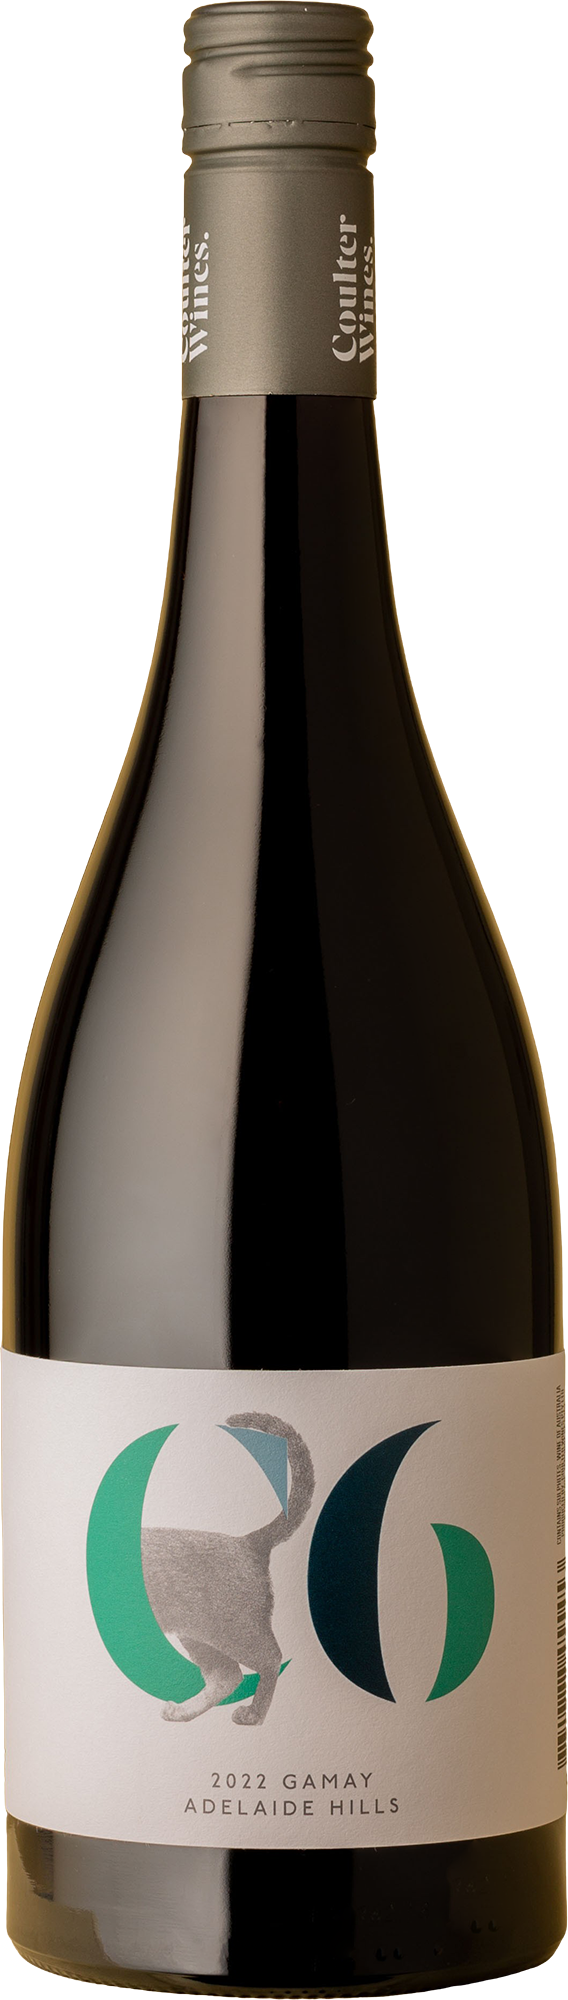 Coulter - C6 Gamay 2022 Red Wine